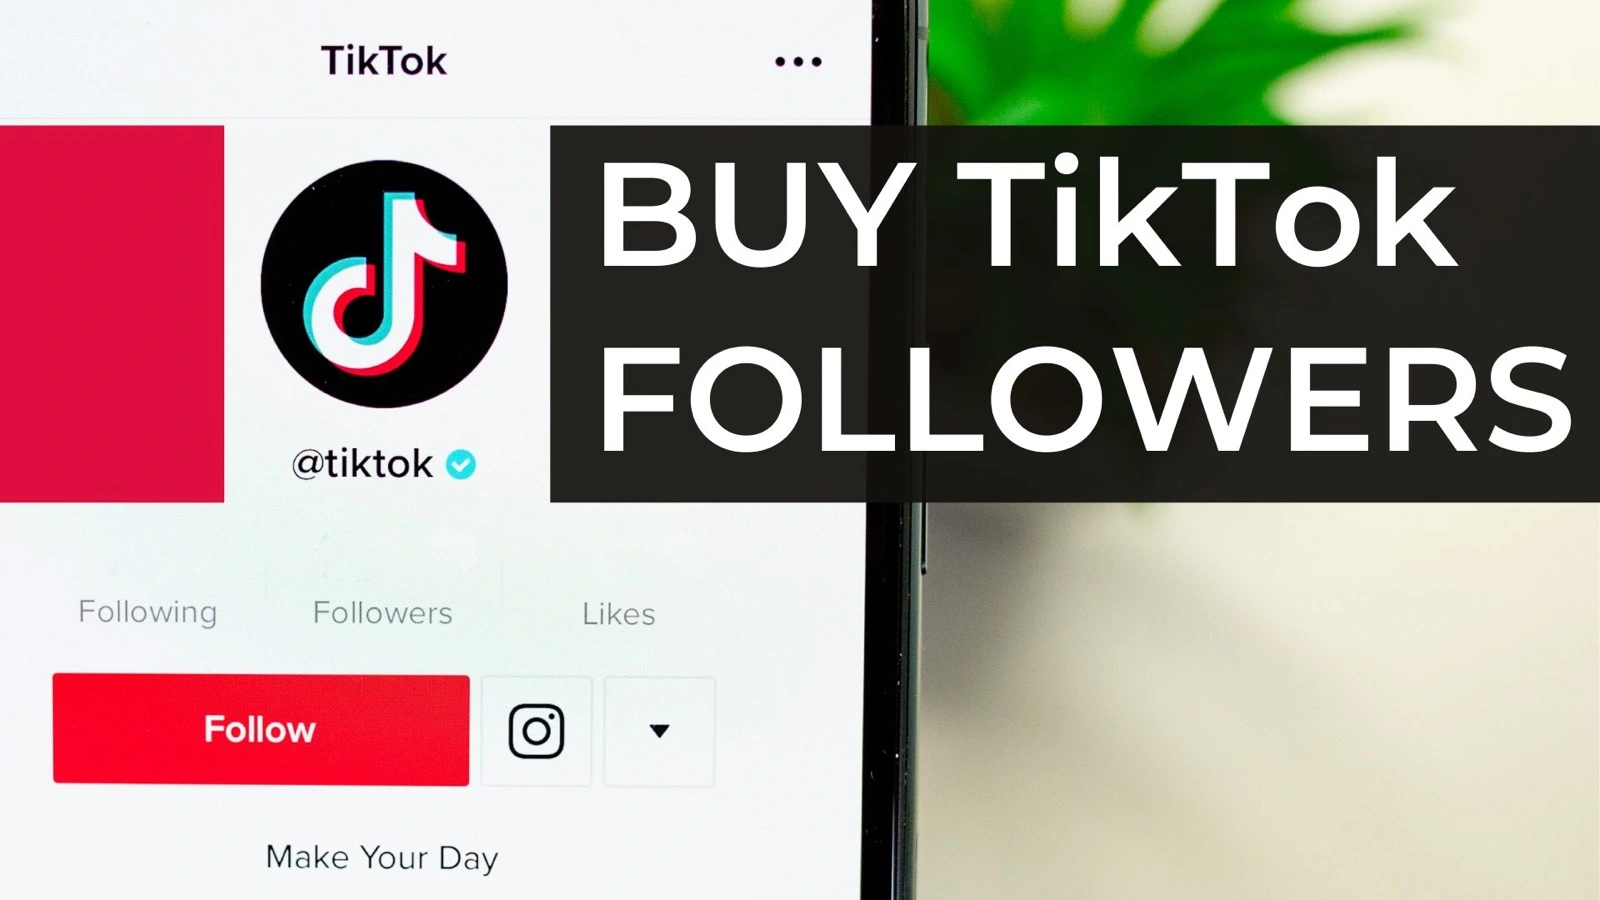 How to Use Hashtags to Get More TikTok Views?